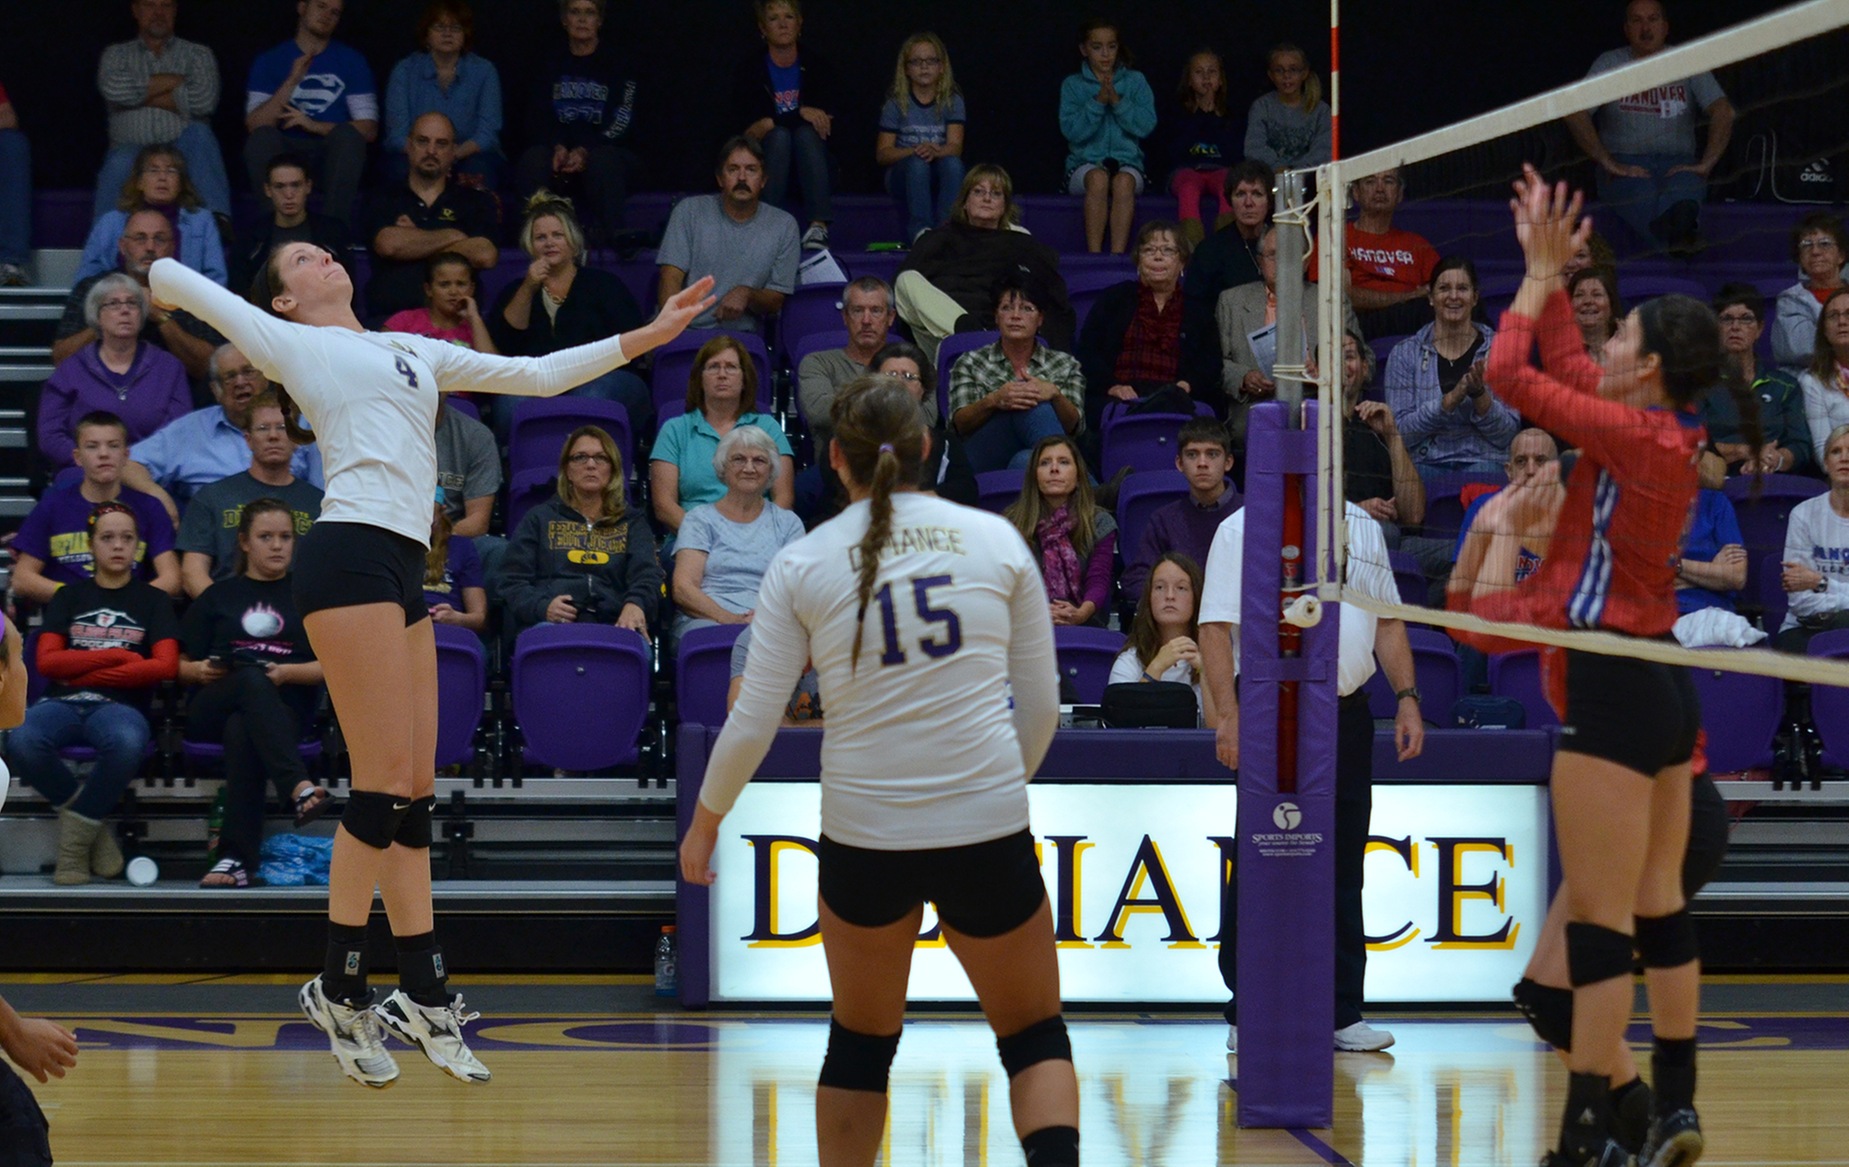 Lady Jackets volleyball falls 3-1 in home-opener to UNOH